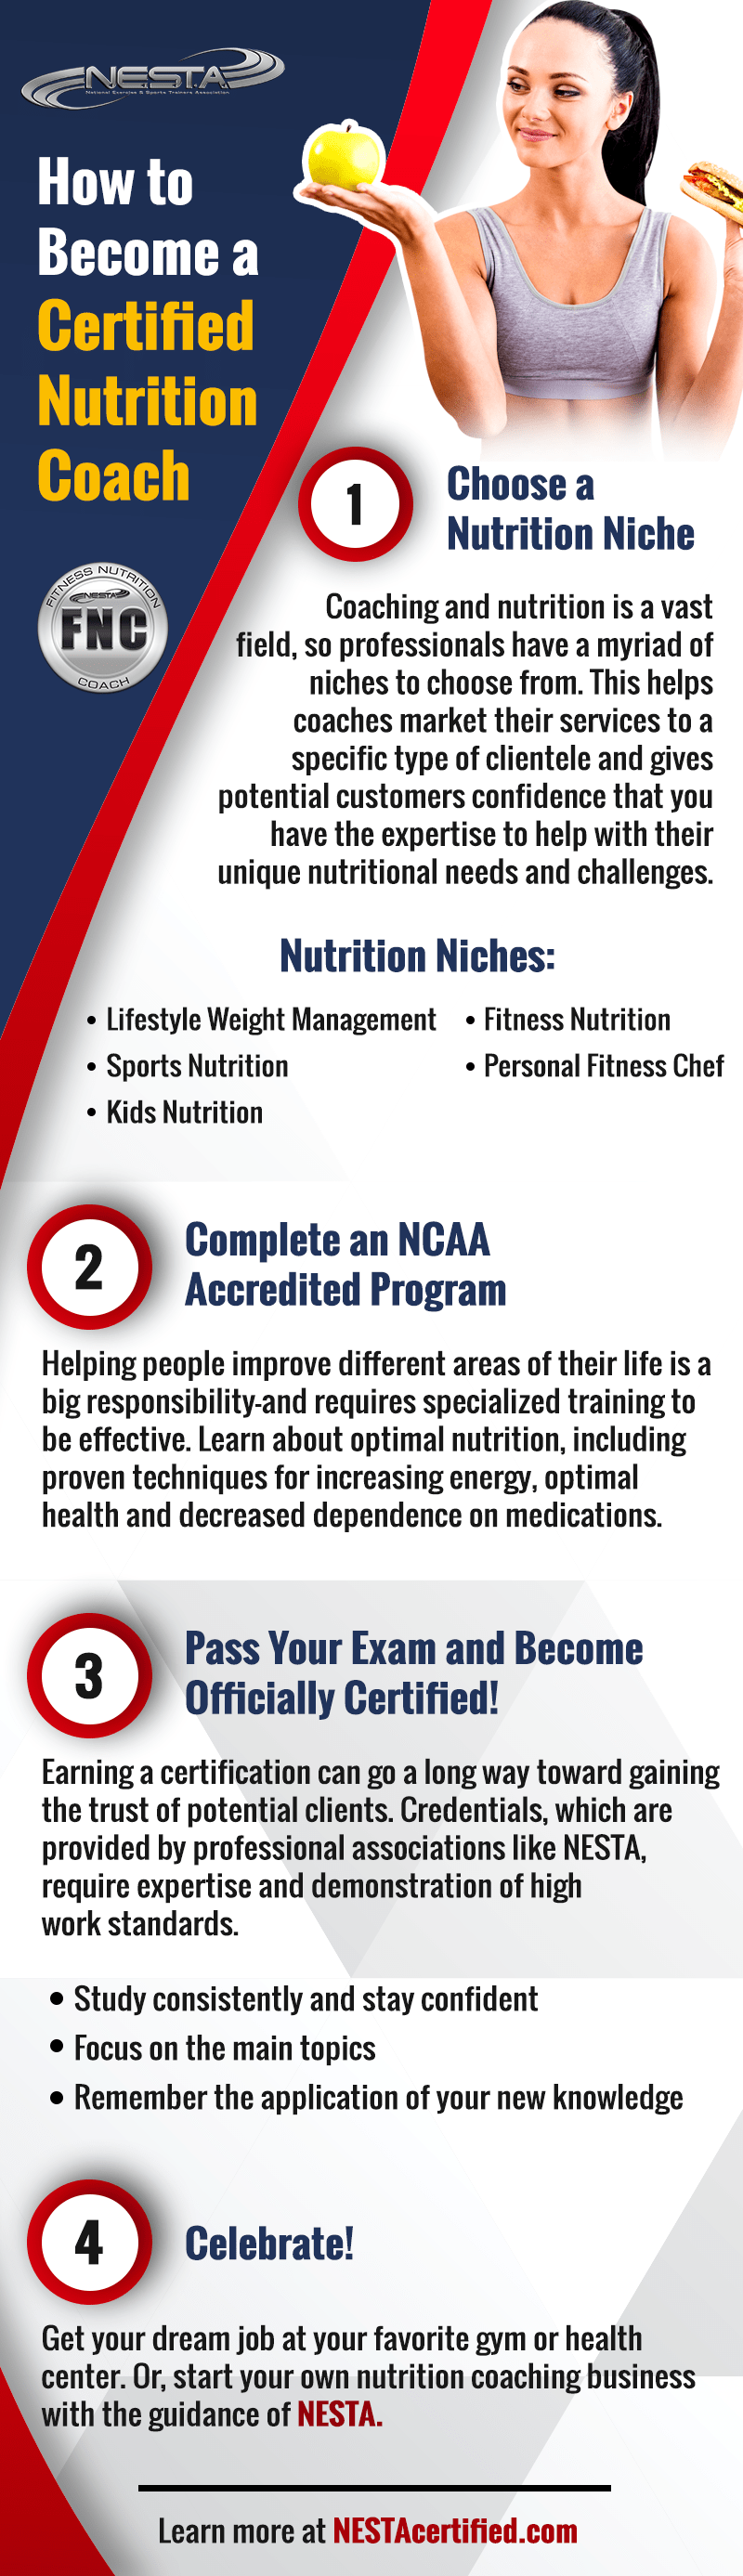 How to Become a Certified Nutrition Coach | Benefits of Nutrition Education